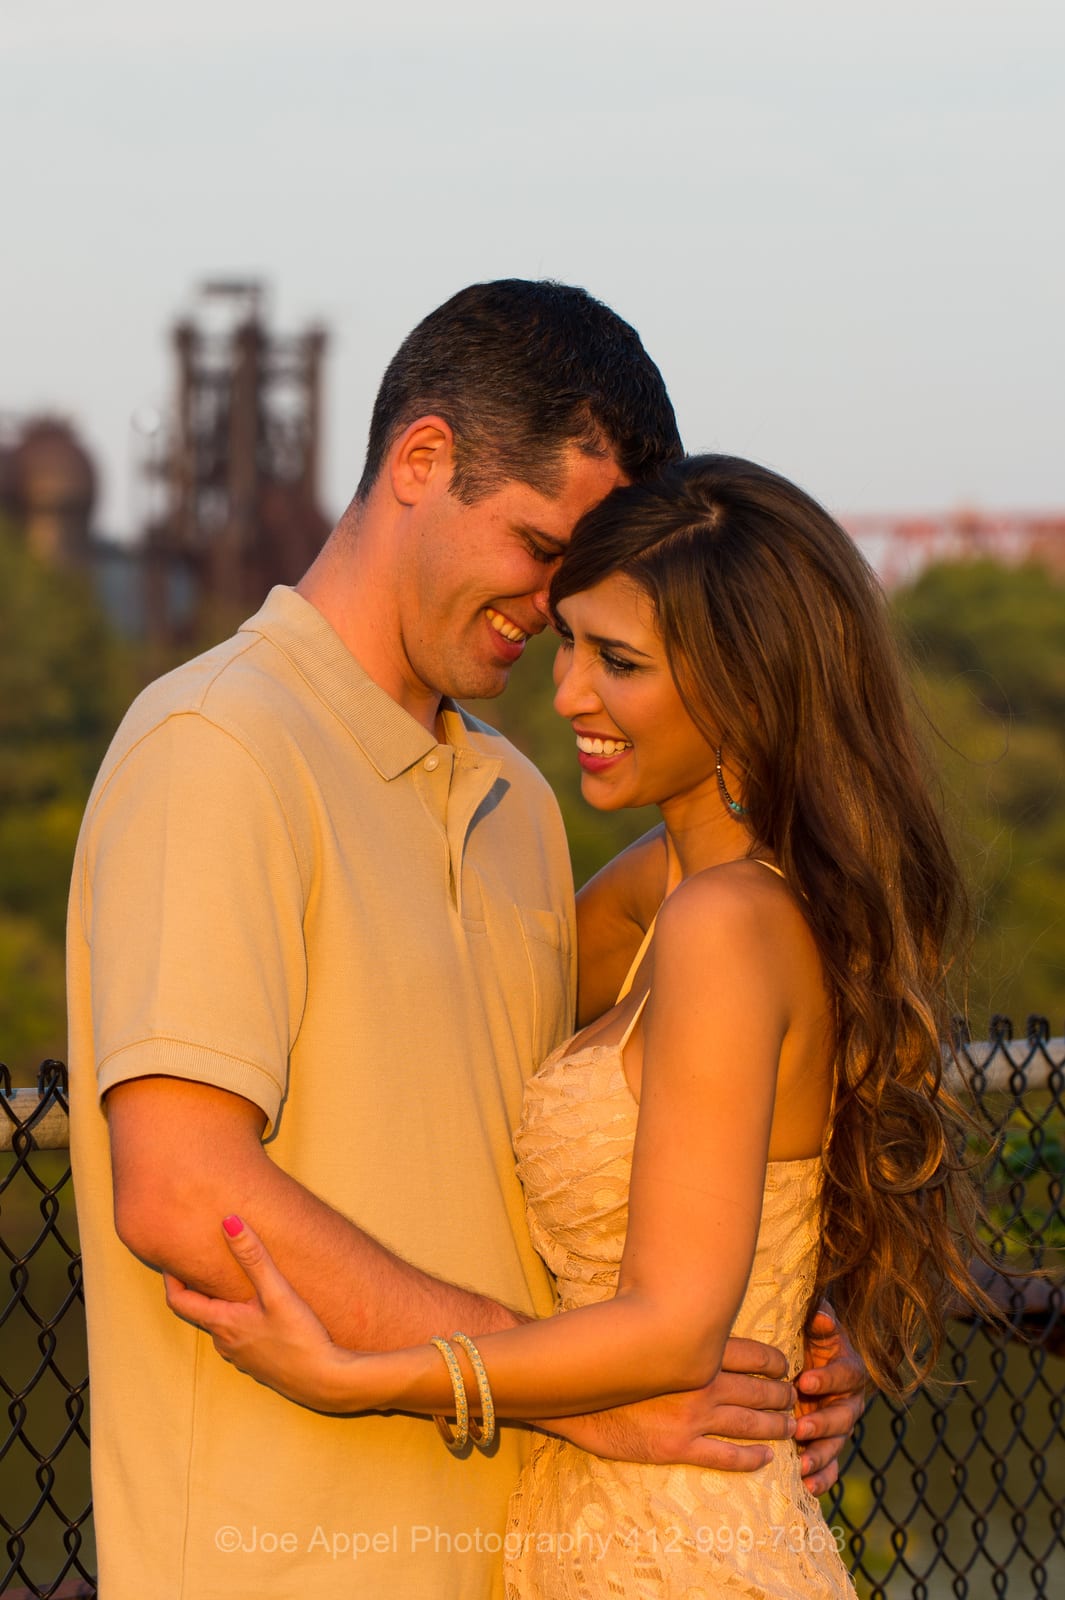 A woman and a man hold each other as the sun sets casting golden light on them in front of an old steel mill during their Pump House Engagement Photography session.